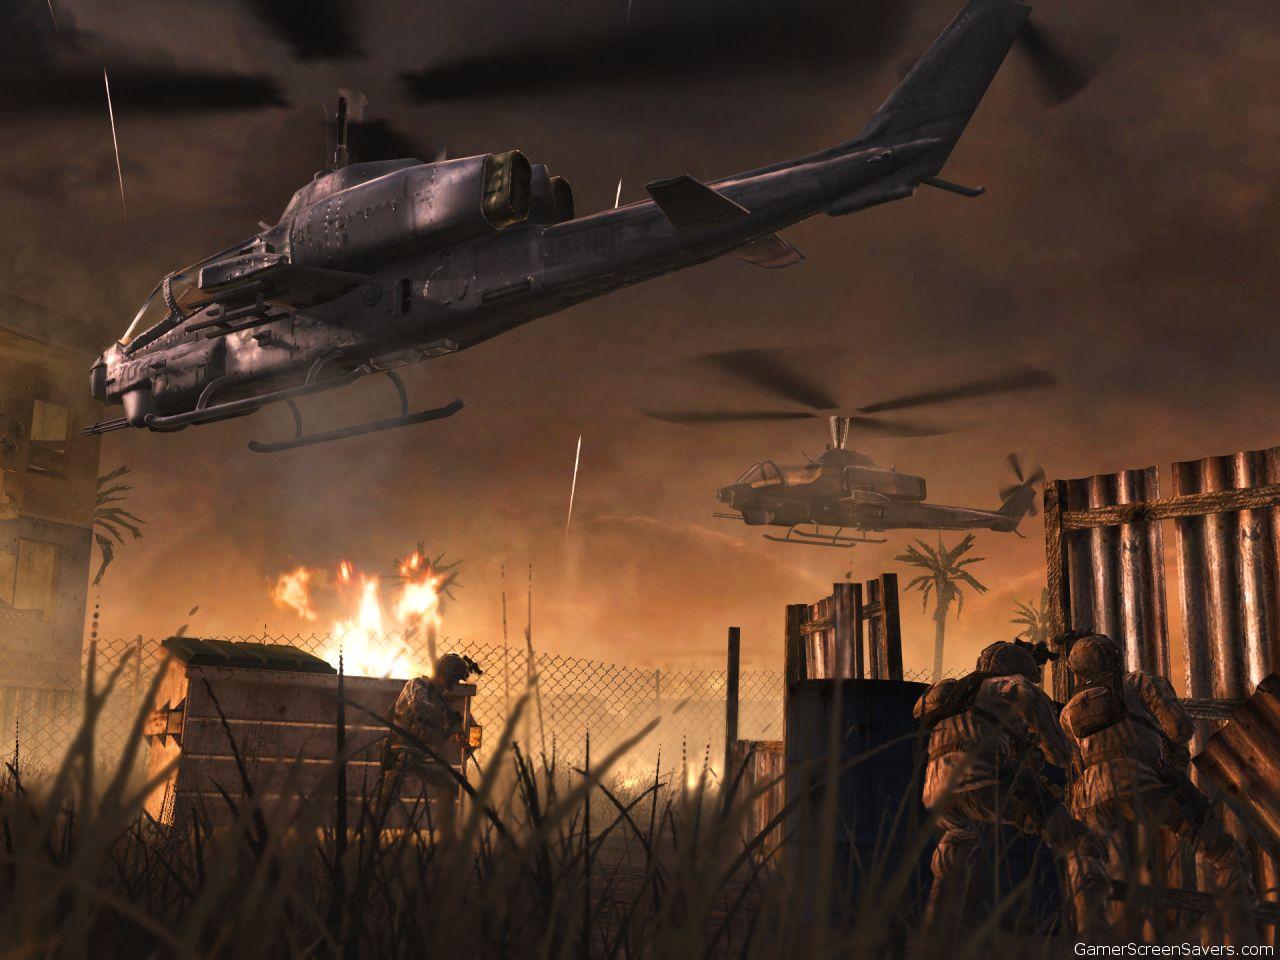 WallpapersKu: Call of Duty 4 Wallpapers